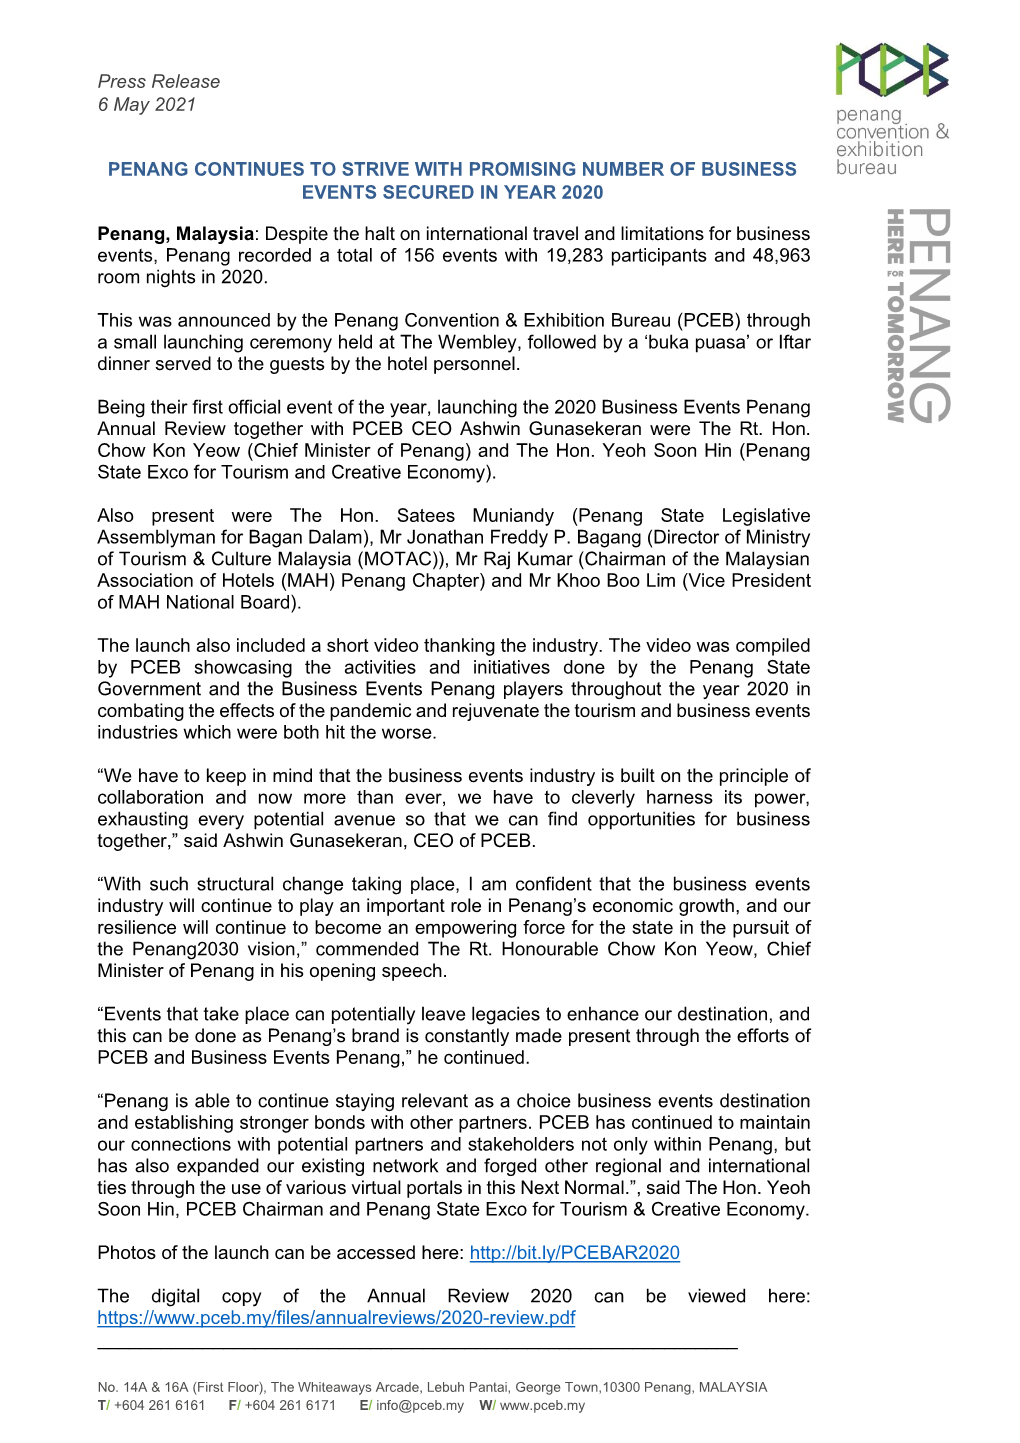 Press Release 6 May 2021 PENANG CONTINUES to STRIVE WITH